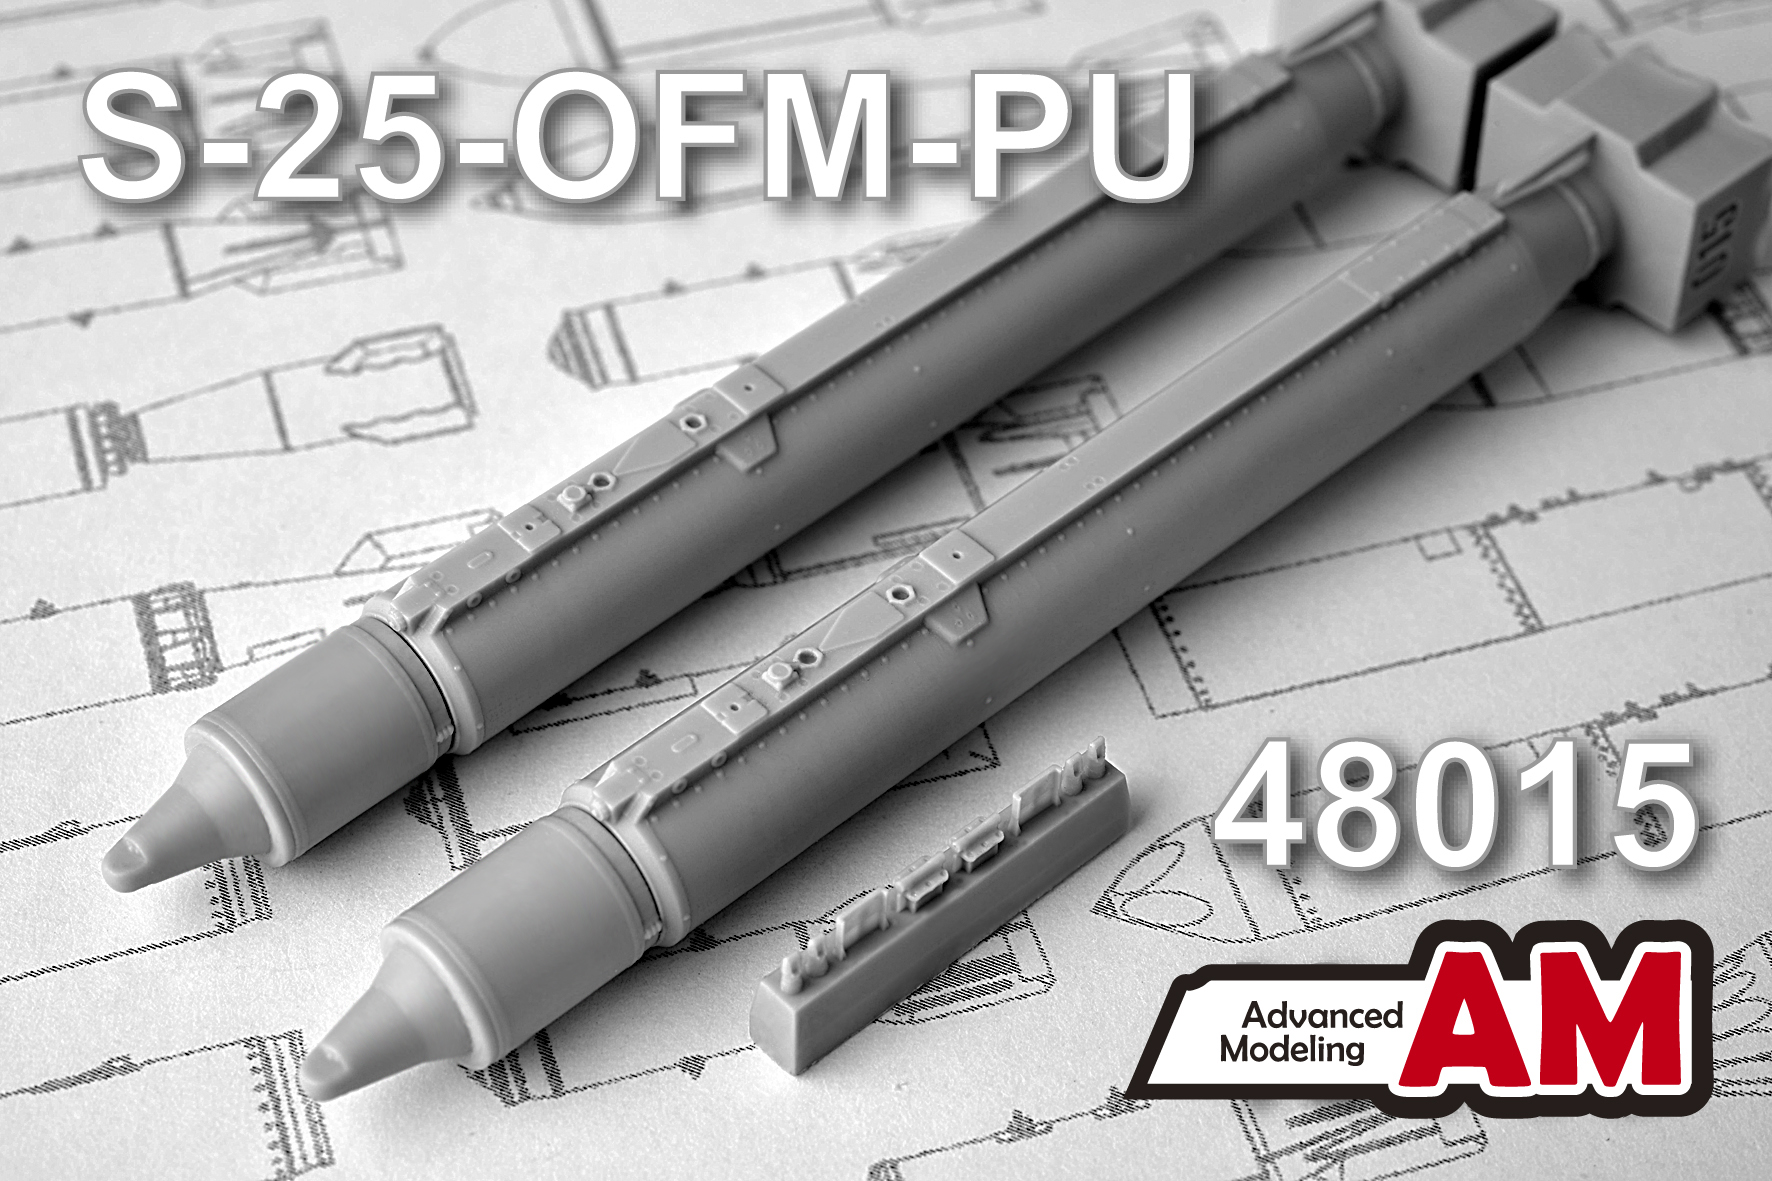 Additions (3D resin printing) 1/48 S-25-OFM-PU Unguided Air-Launched Rocket (Advanced Modeling) 